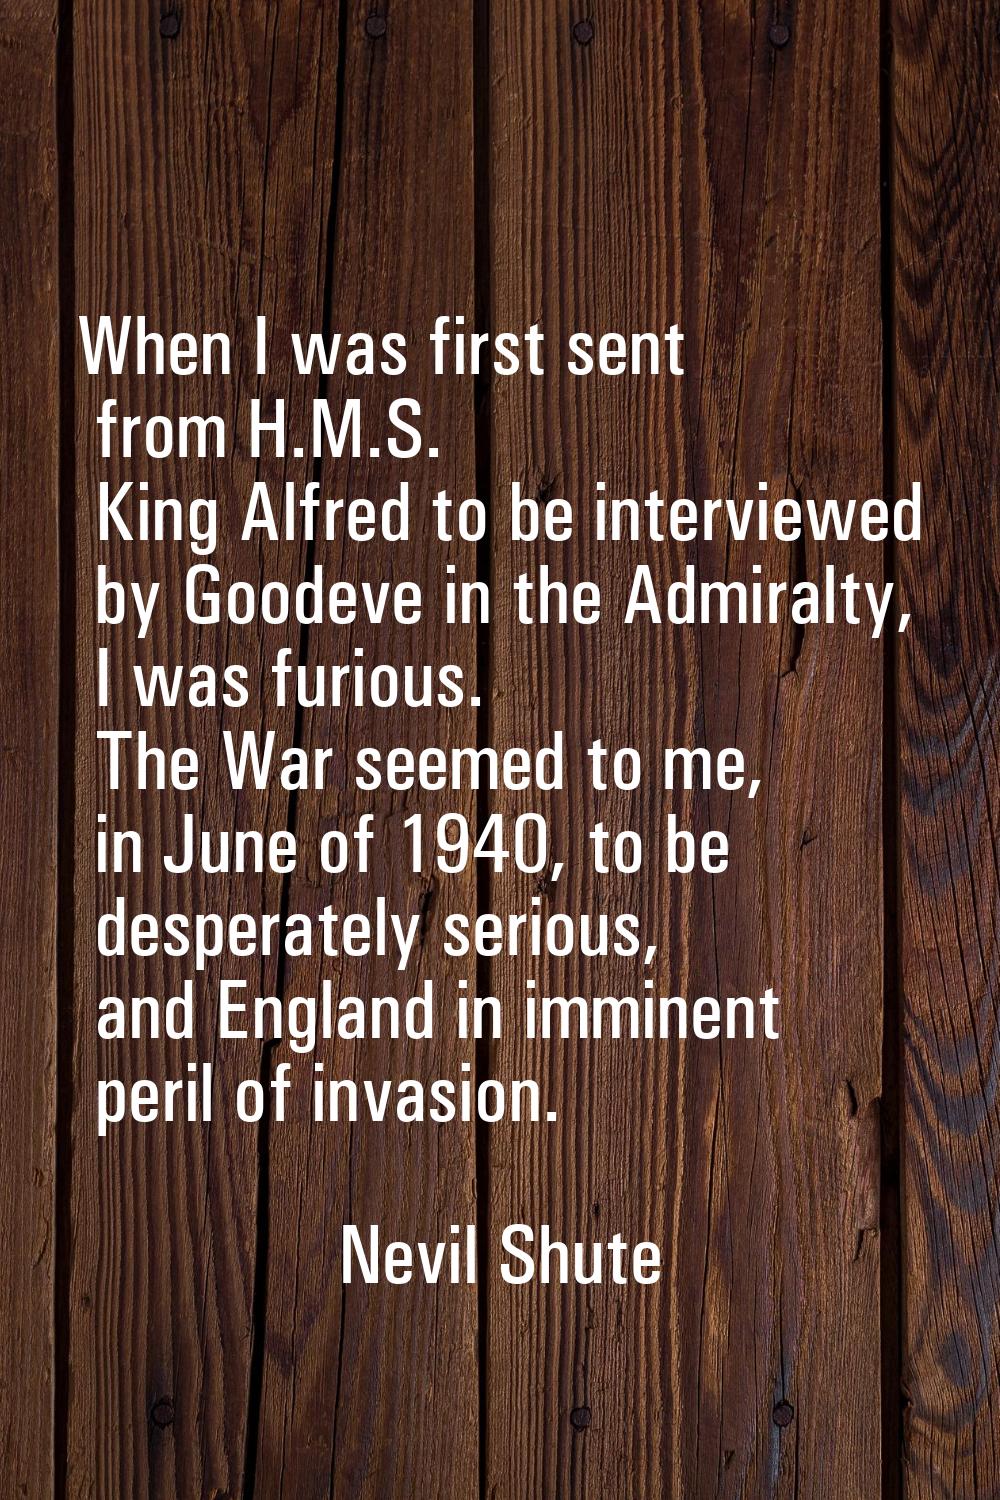 When I was first sent from H.M.S. King Alfred to be interviewed by Goodeve in the Admiralty, I was 